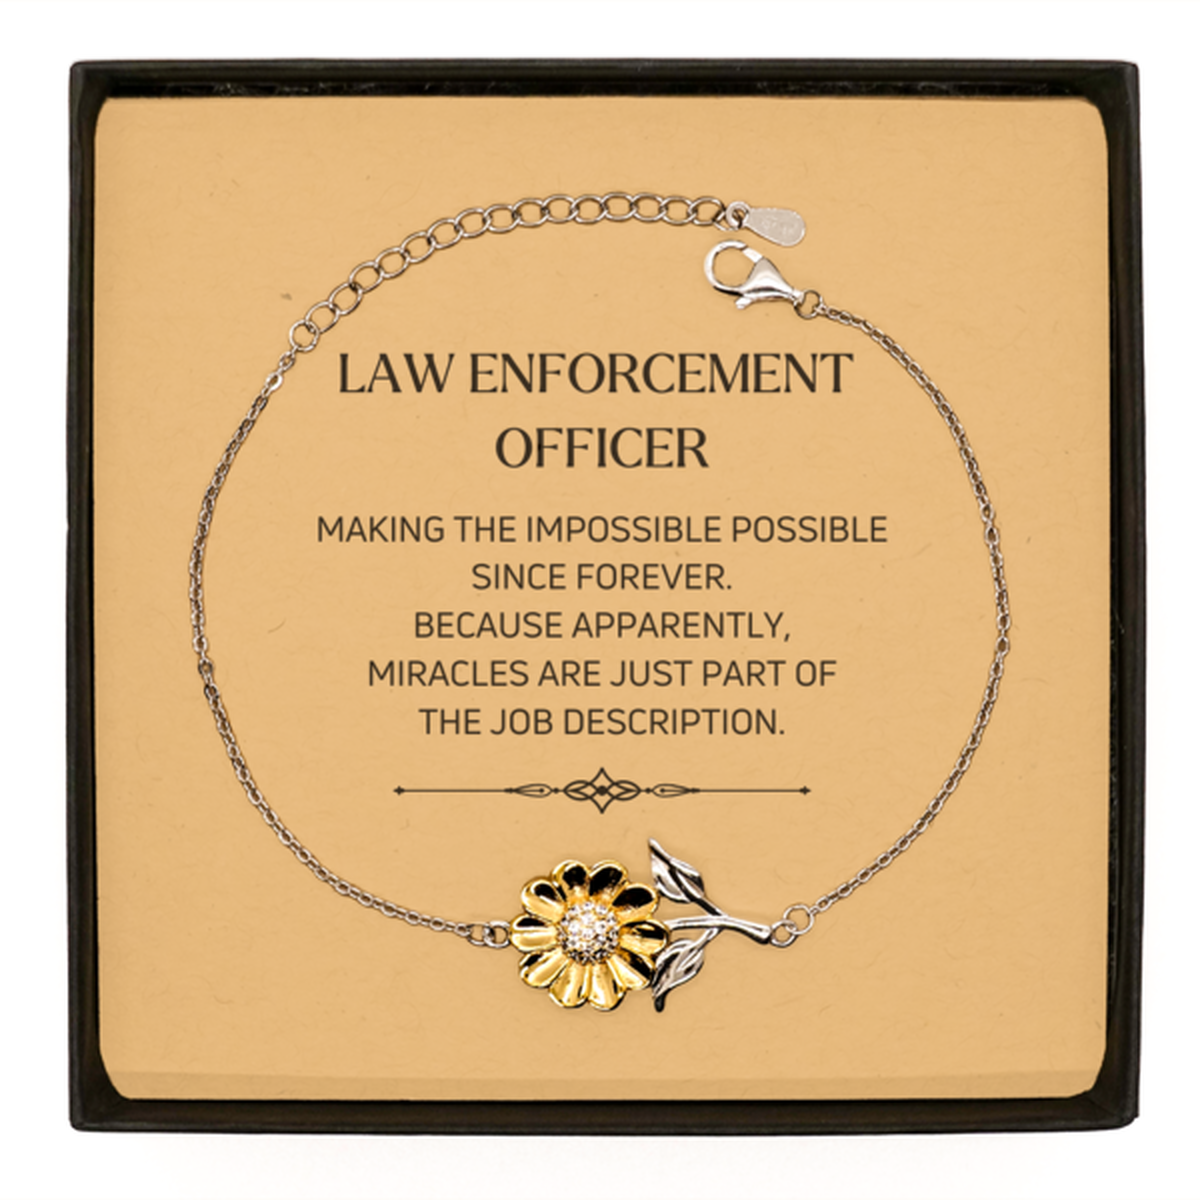 Funny Law Enforcement Officer Gifts, Miracles are just part of the job description, Inspirational Birthday Sunflower Bracelet For Law Enforcement Officer, Men, Women, Coworkers, Friends, Boss